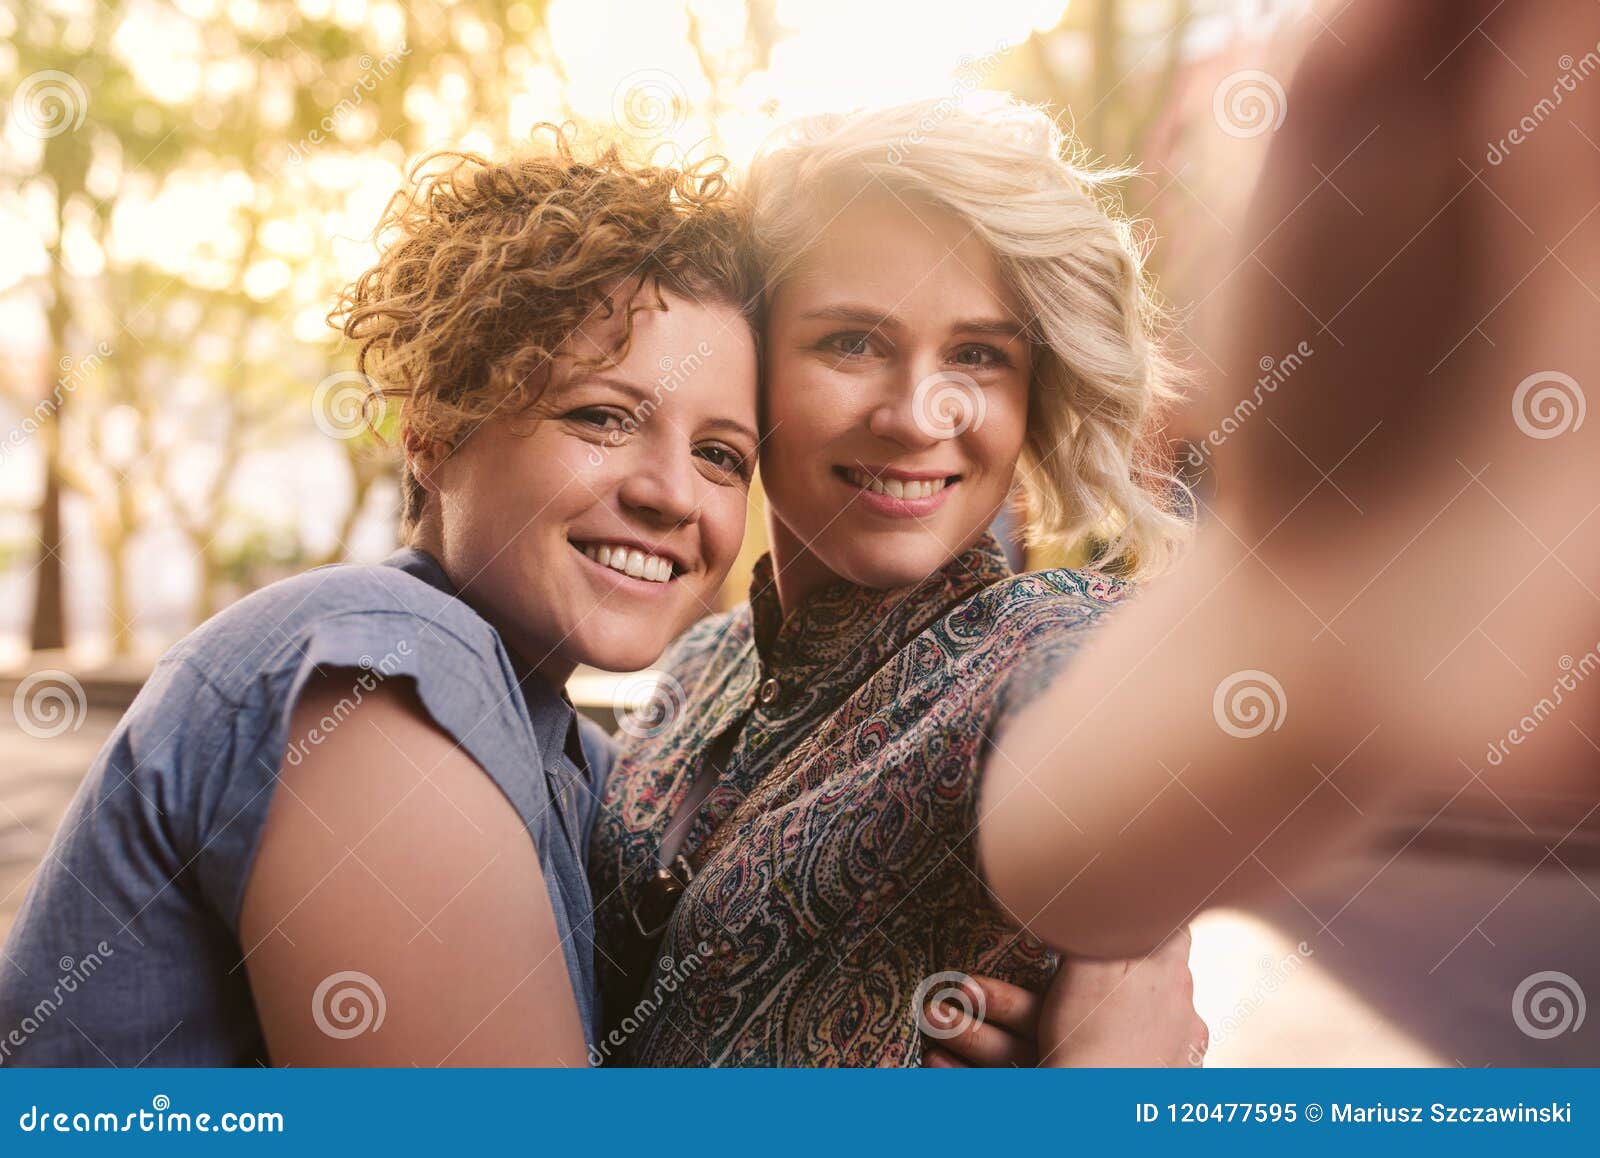 Lesbian Stock Images 20 718 Photos Page 8